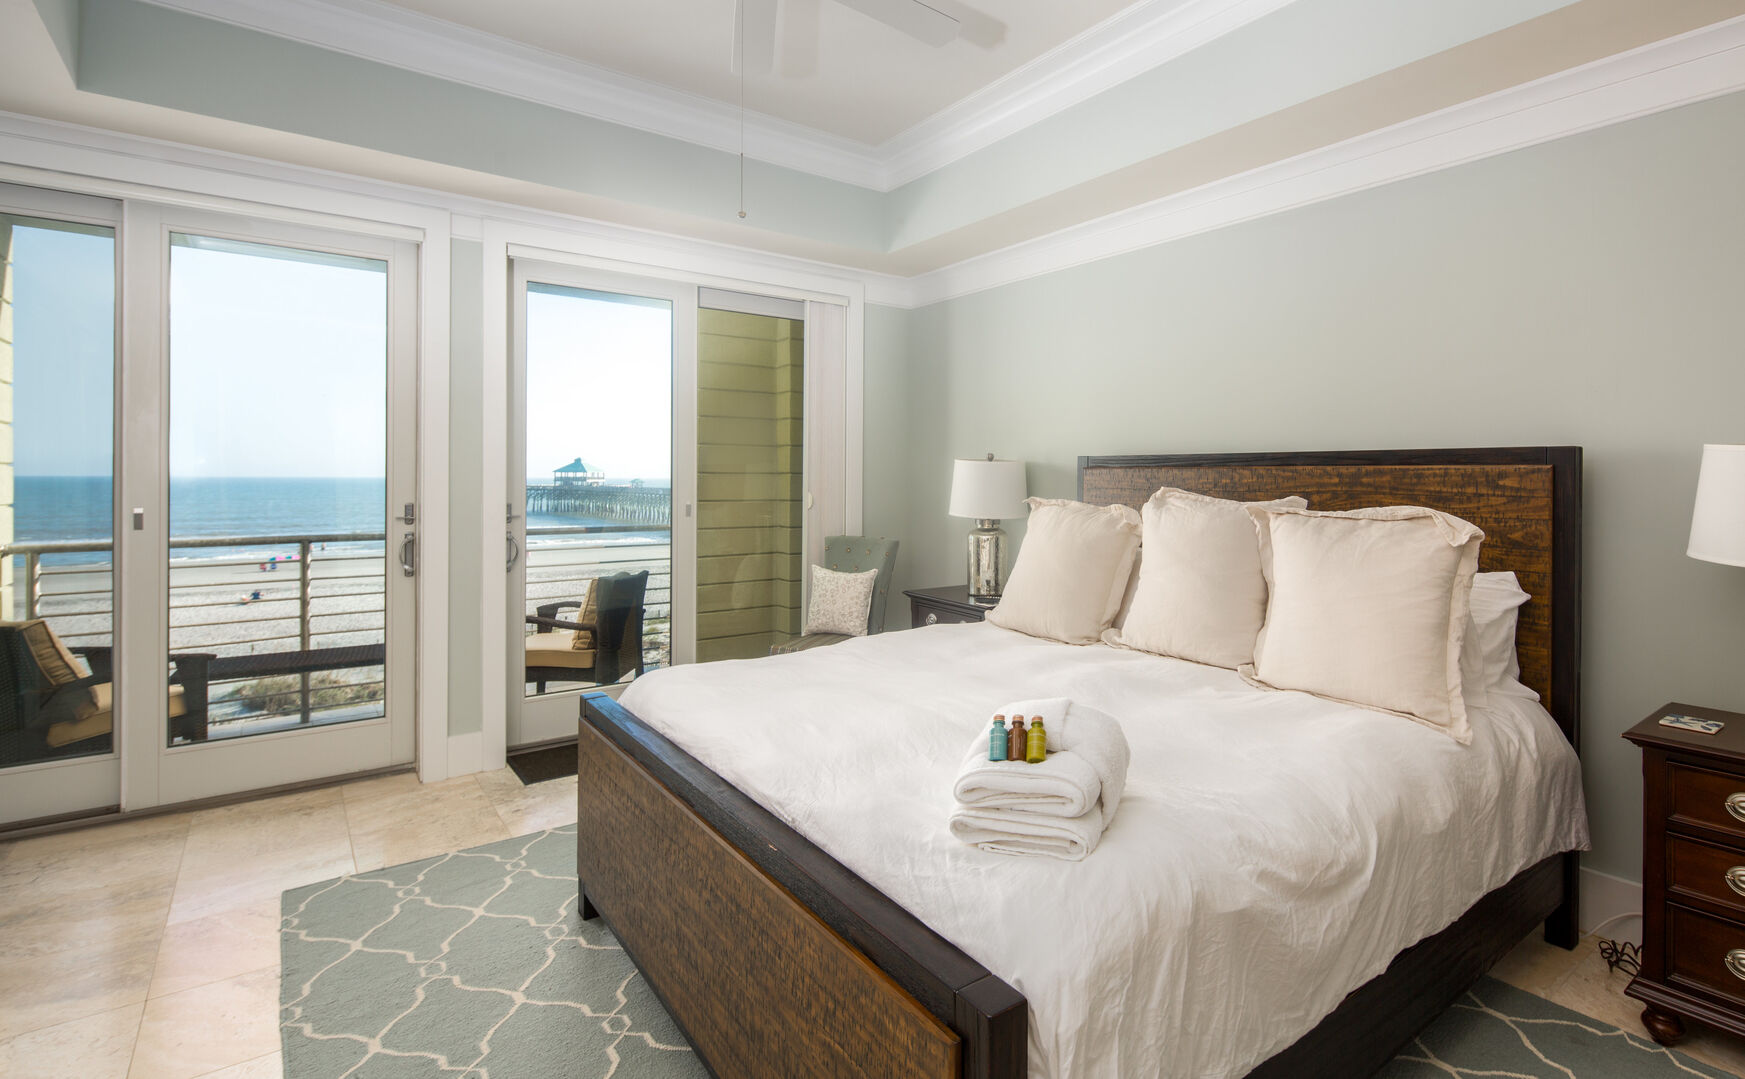 Guest bedroom 2 with ensuite bathroom and private balcony overlooking the beachfront